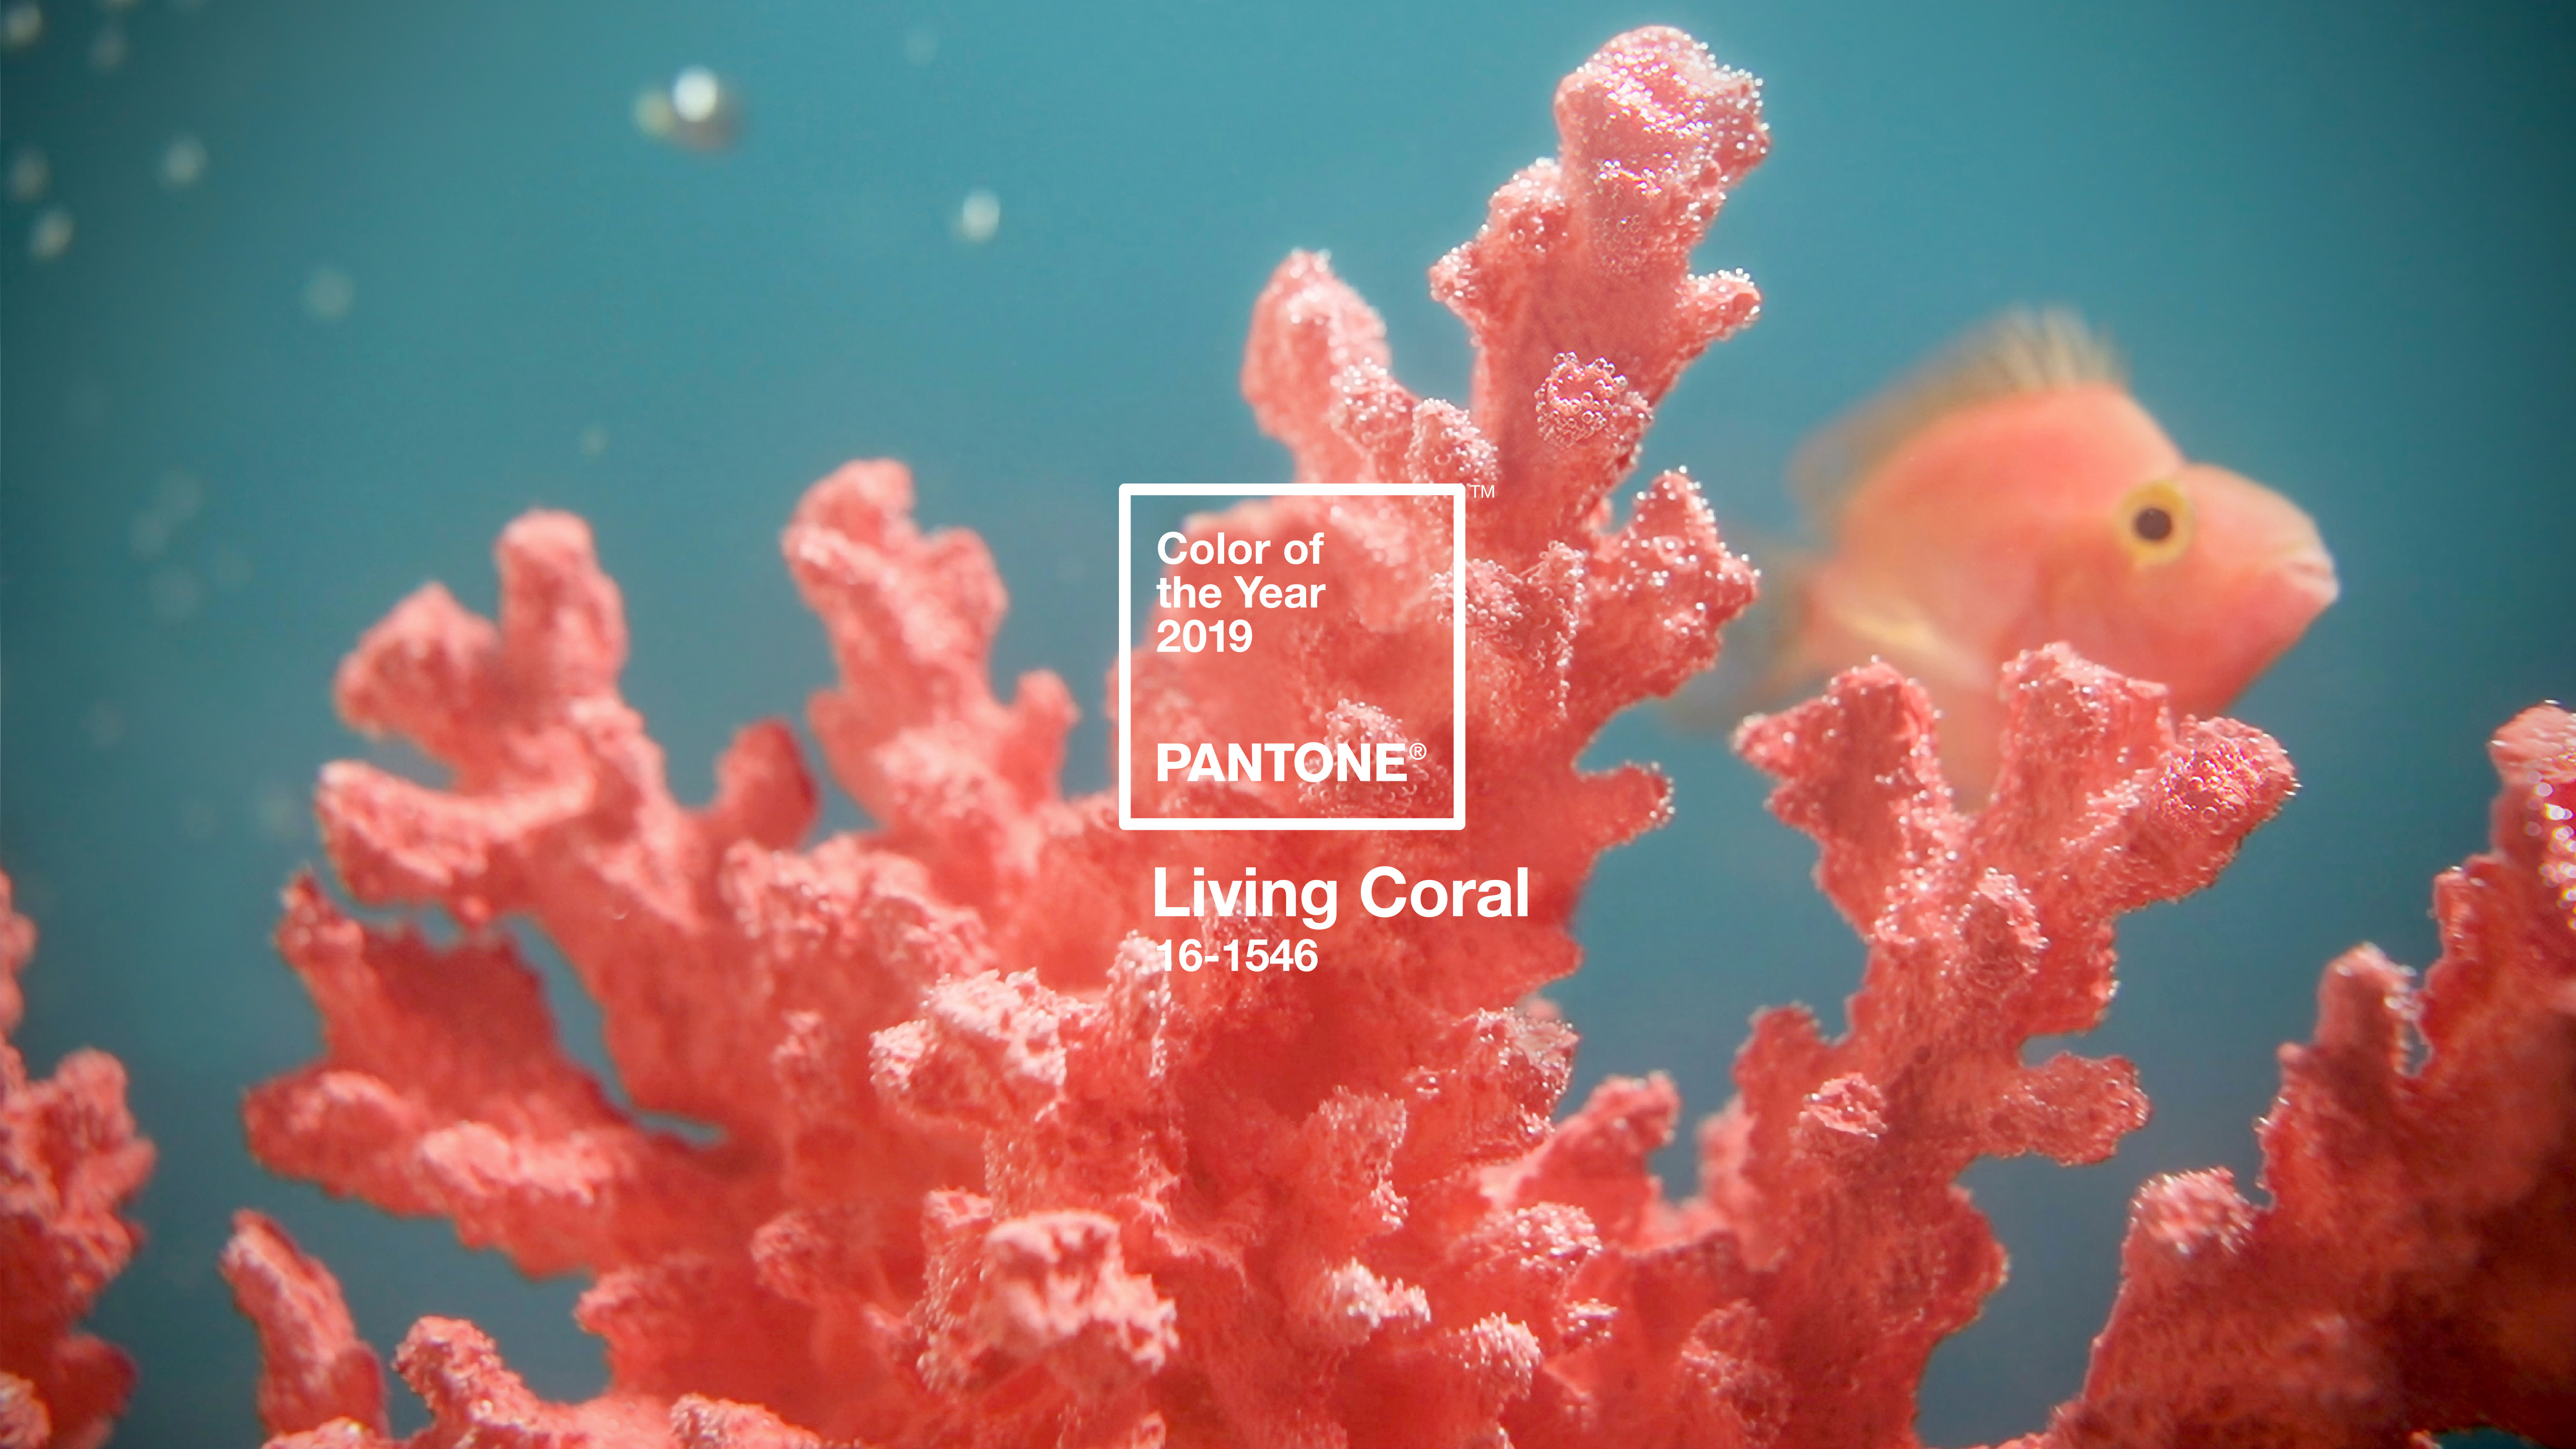 Pantone 2019 Color of the Year Living Coral Swatch | Pantone Colour of the Year 2019 Living Coral Inspiration | How to Incorporate Pantone's Color of the Year 2019 Living Coral in Your Home, Beauty Routine, Personal Style, Wardrobe, Flowers, Decor, Food, Drink and Entertaining this year | Living Coral Interior Design Trends | Pantone Living Coral Inspiration | How to Use Pantone Color of the Year 2019 Living Coral // JustineCelina.com